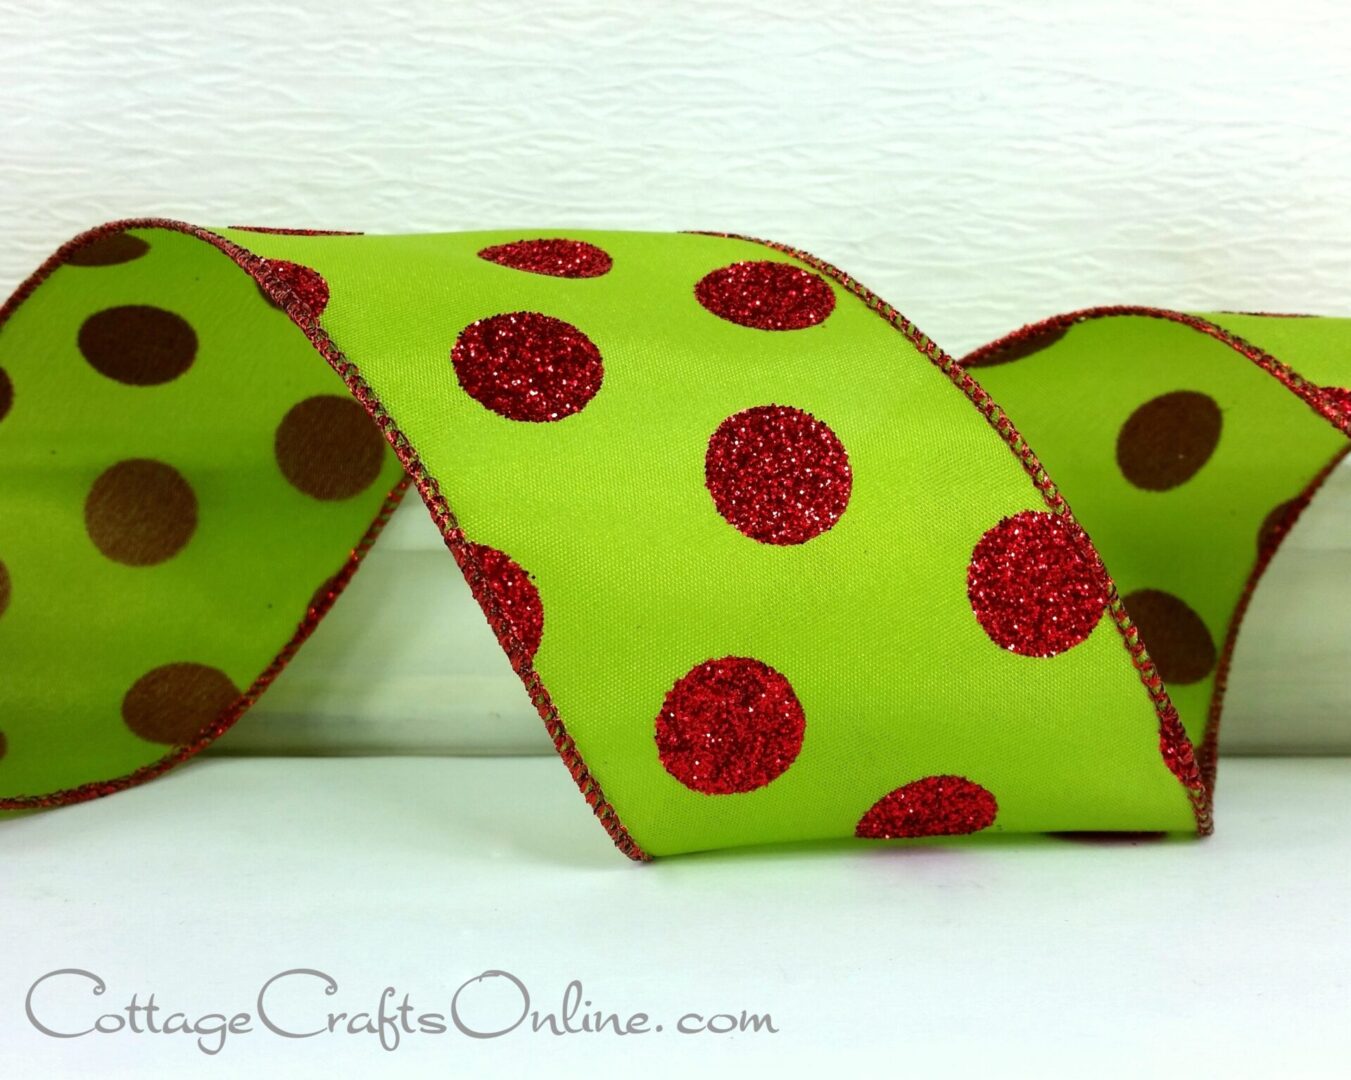 A green ribbon with red polka dots on it